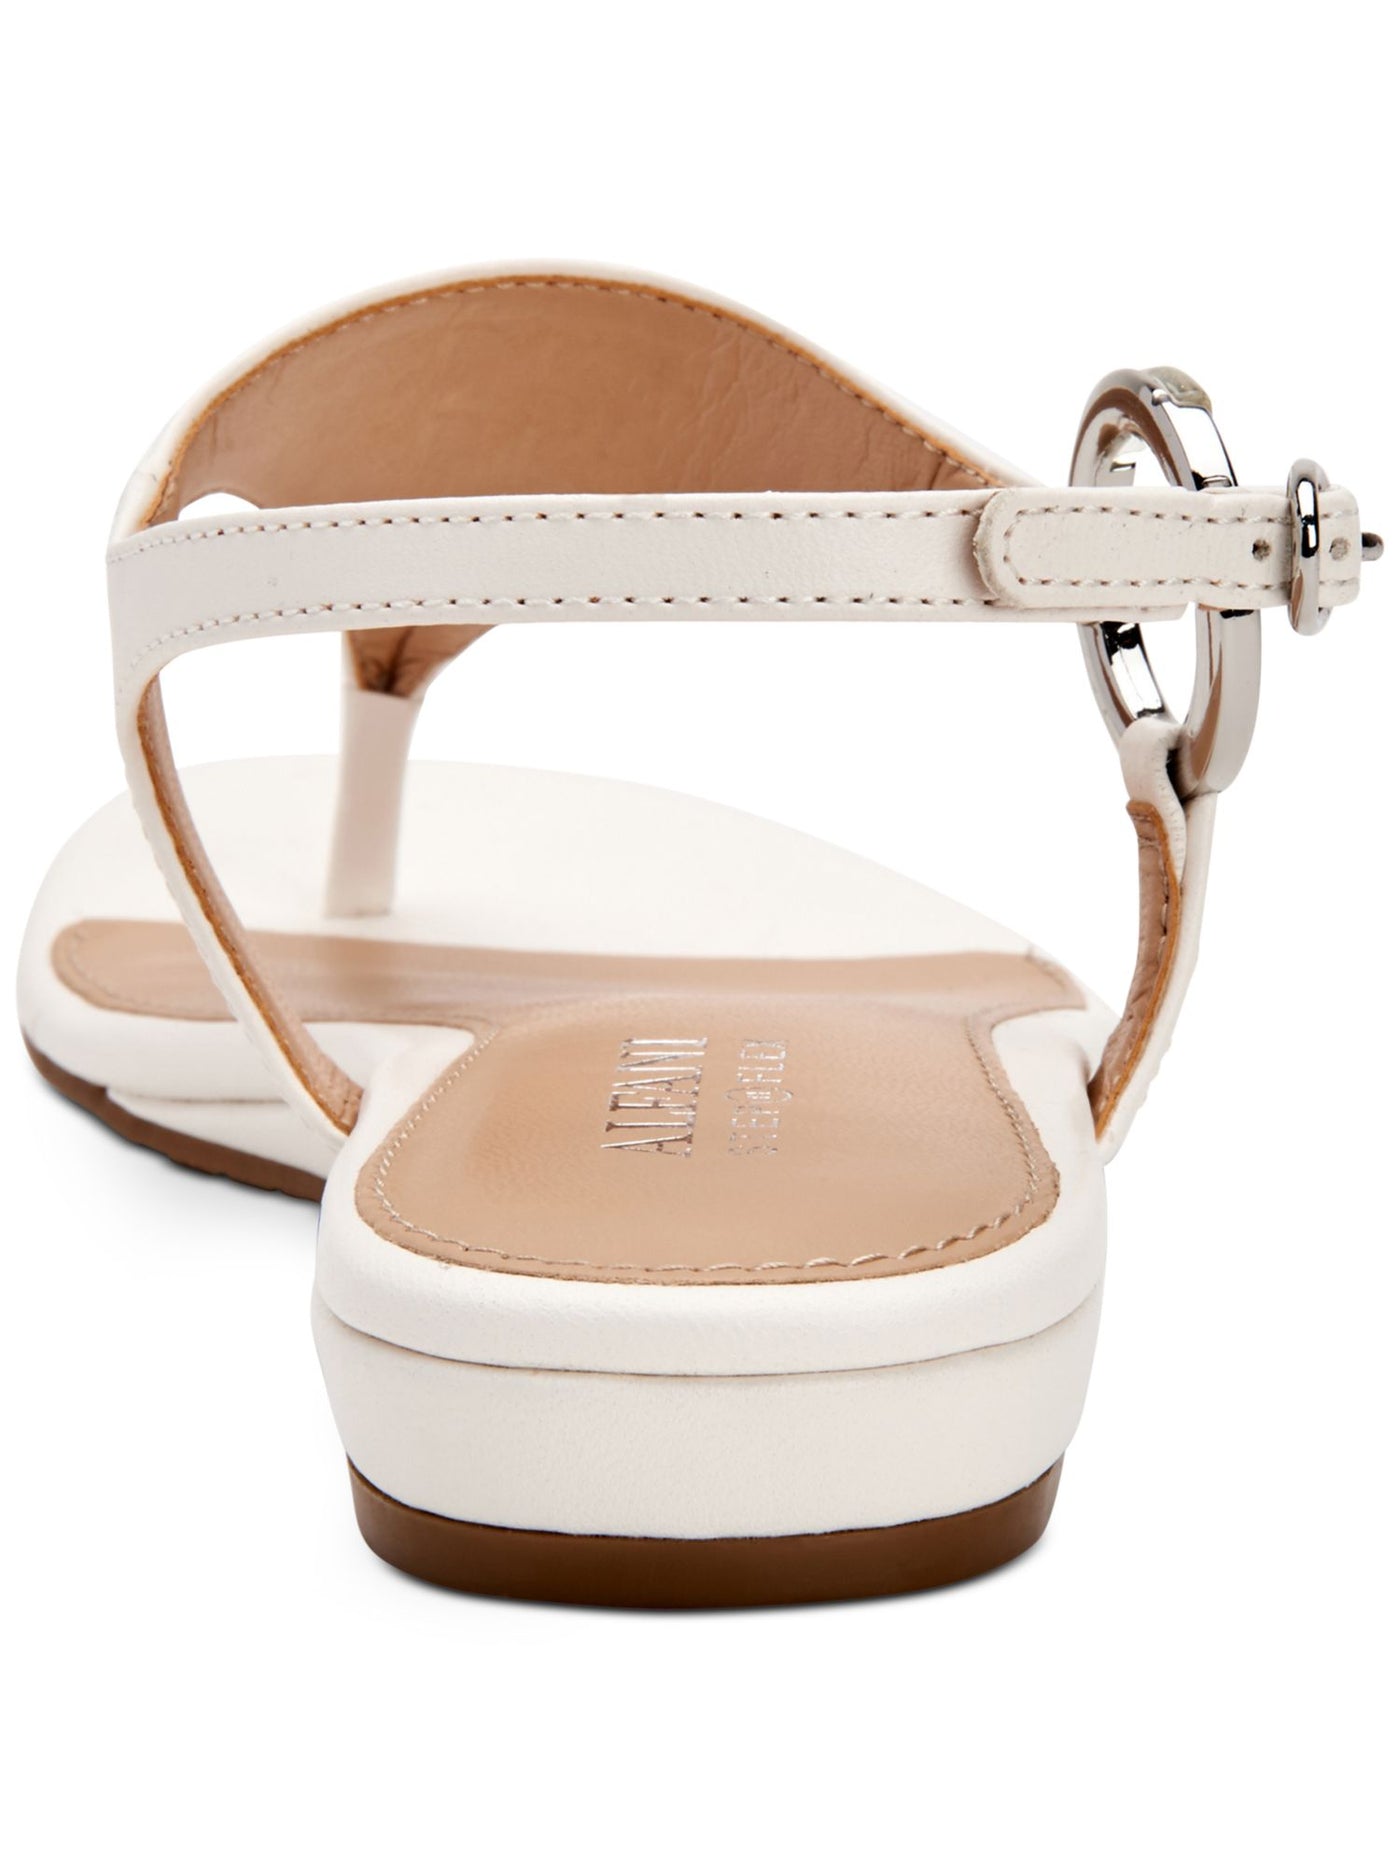 ALFANI Womens White Ring Hardware Shield Hayyden Round Toe Buckle Thong Sandals Shoes 9.5 M